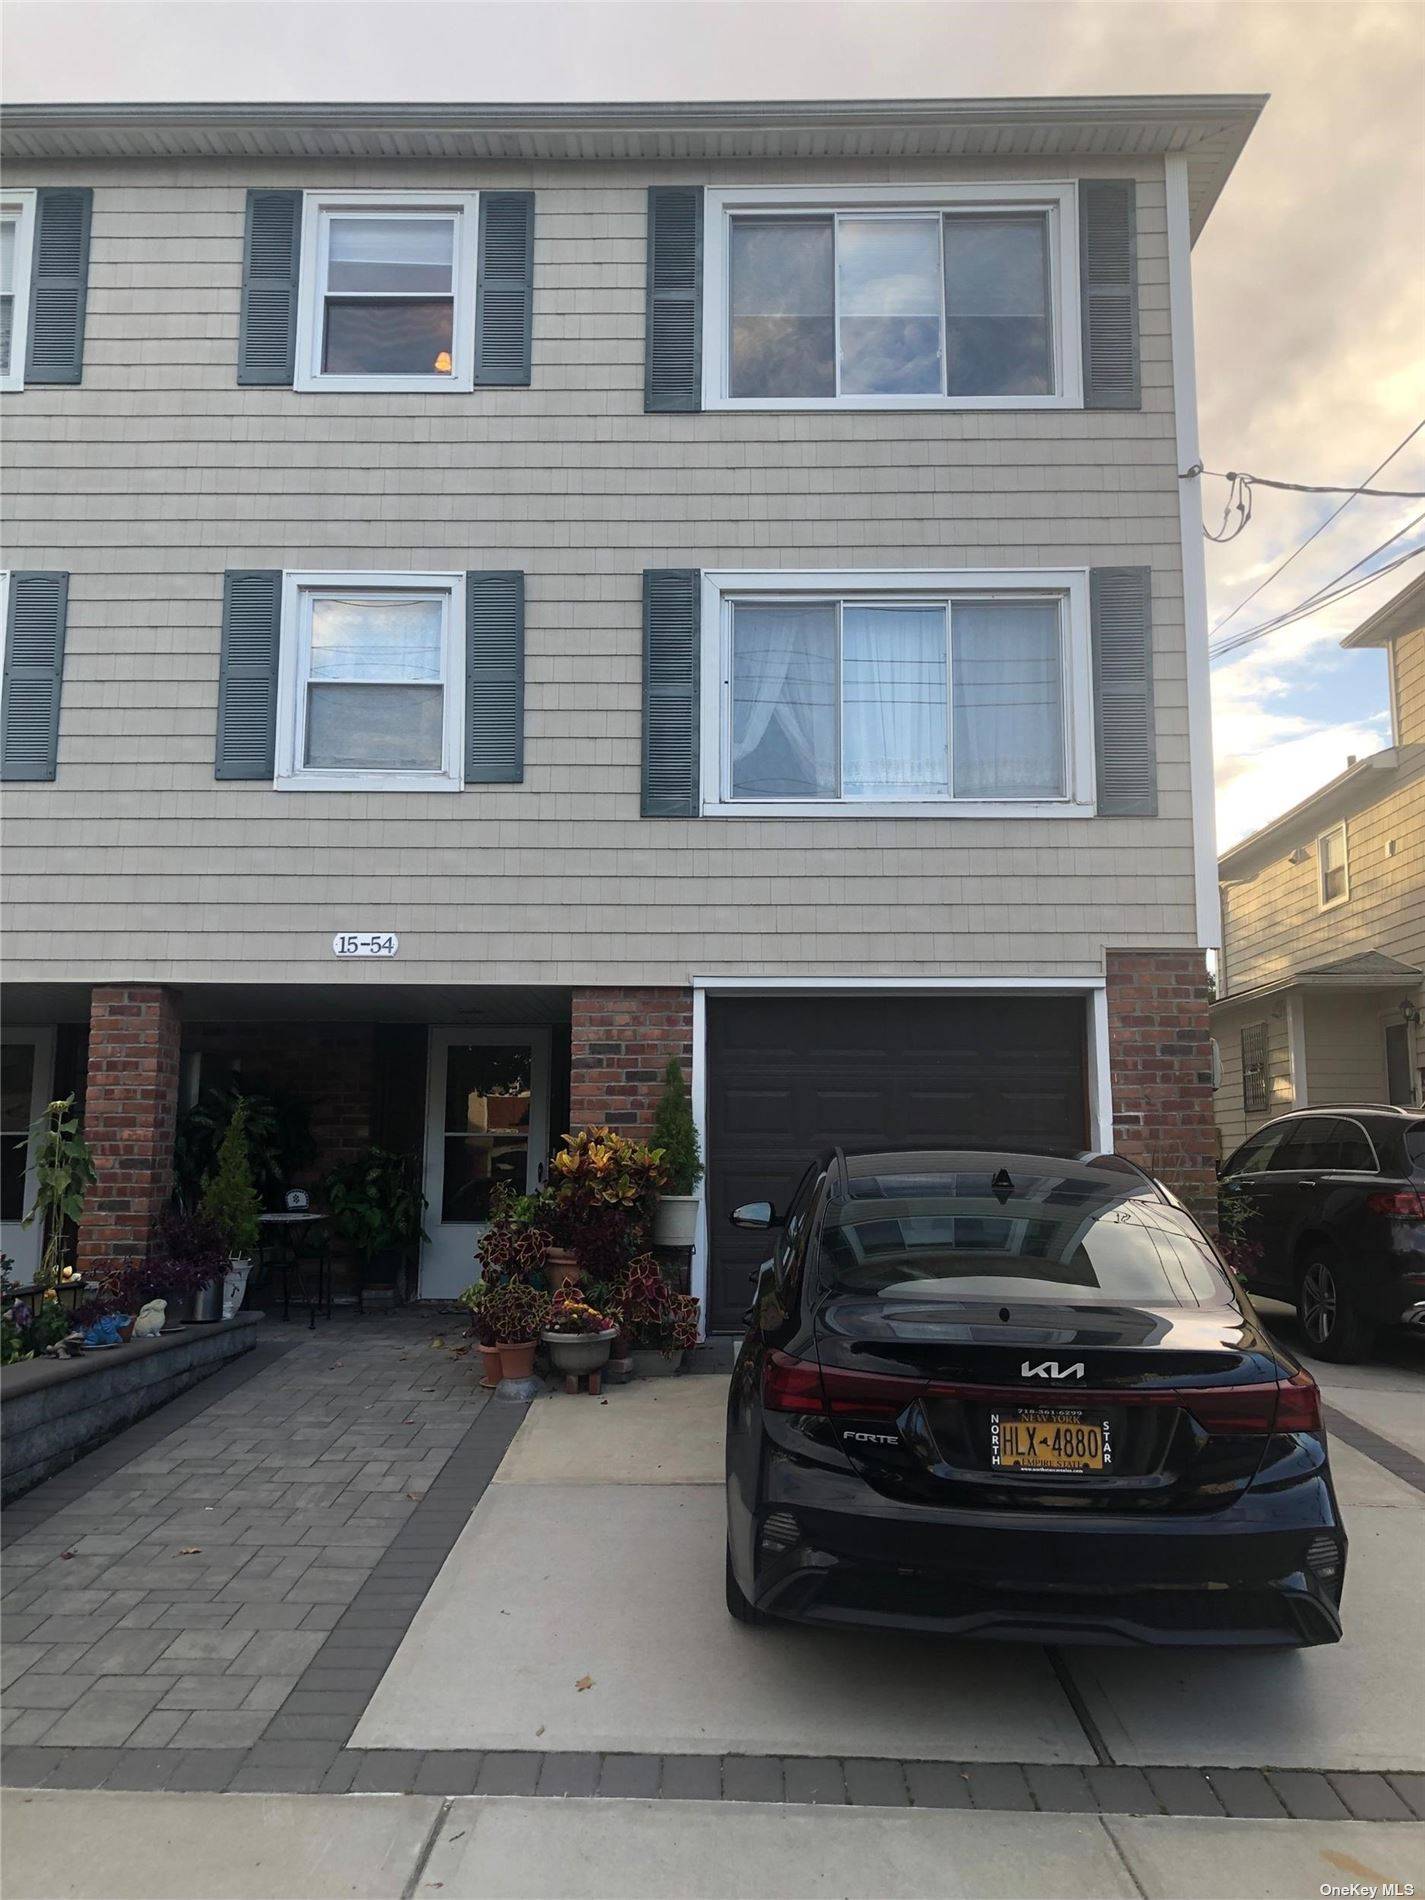 Duplex Big apartment 1, 200Sf with Washer and Dryer and parking for two cars, close to all major Highway, Q16 to Flushing, express buss to the NYC, Little neck bay ...